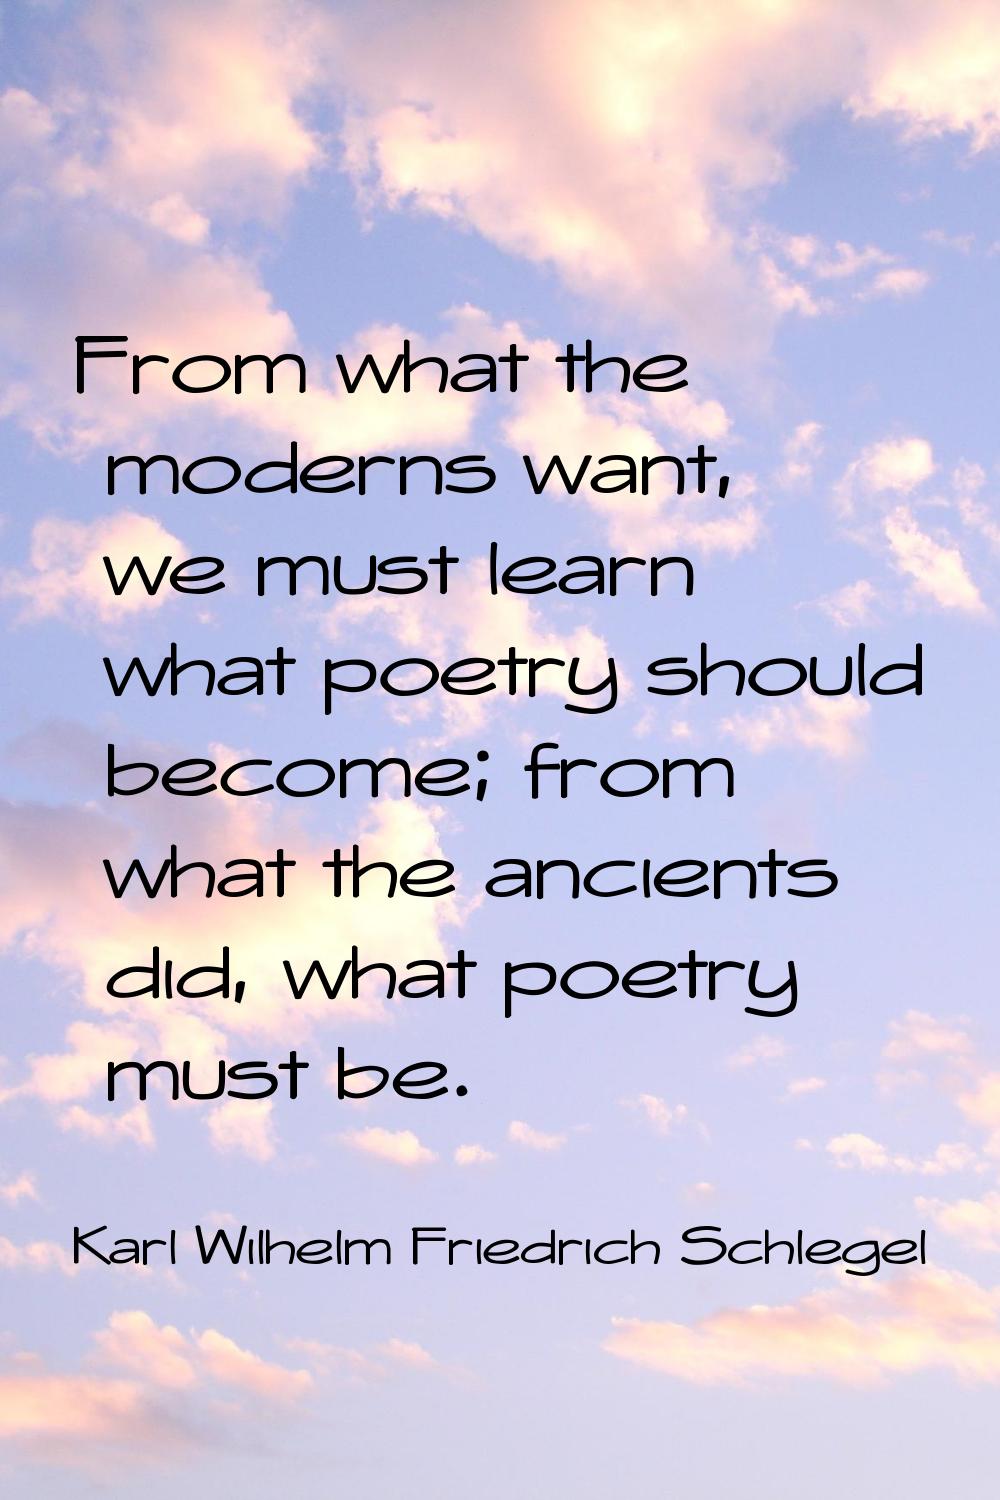 From what the moderns want, we must learn what poetry should become; from what the ancients did, wh